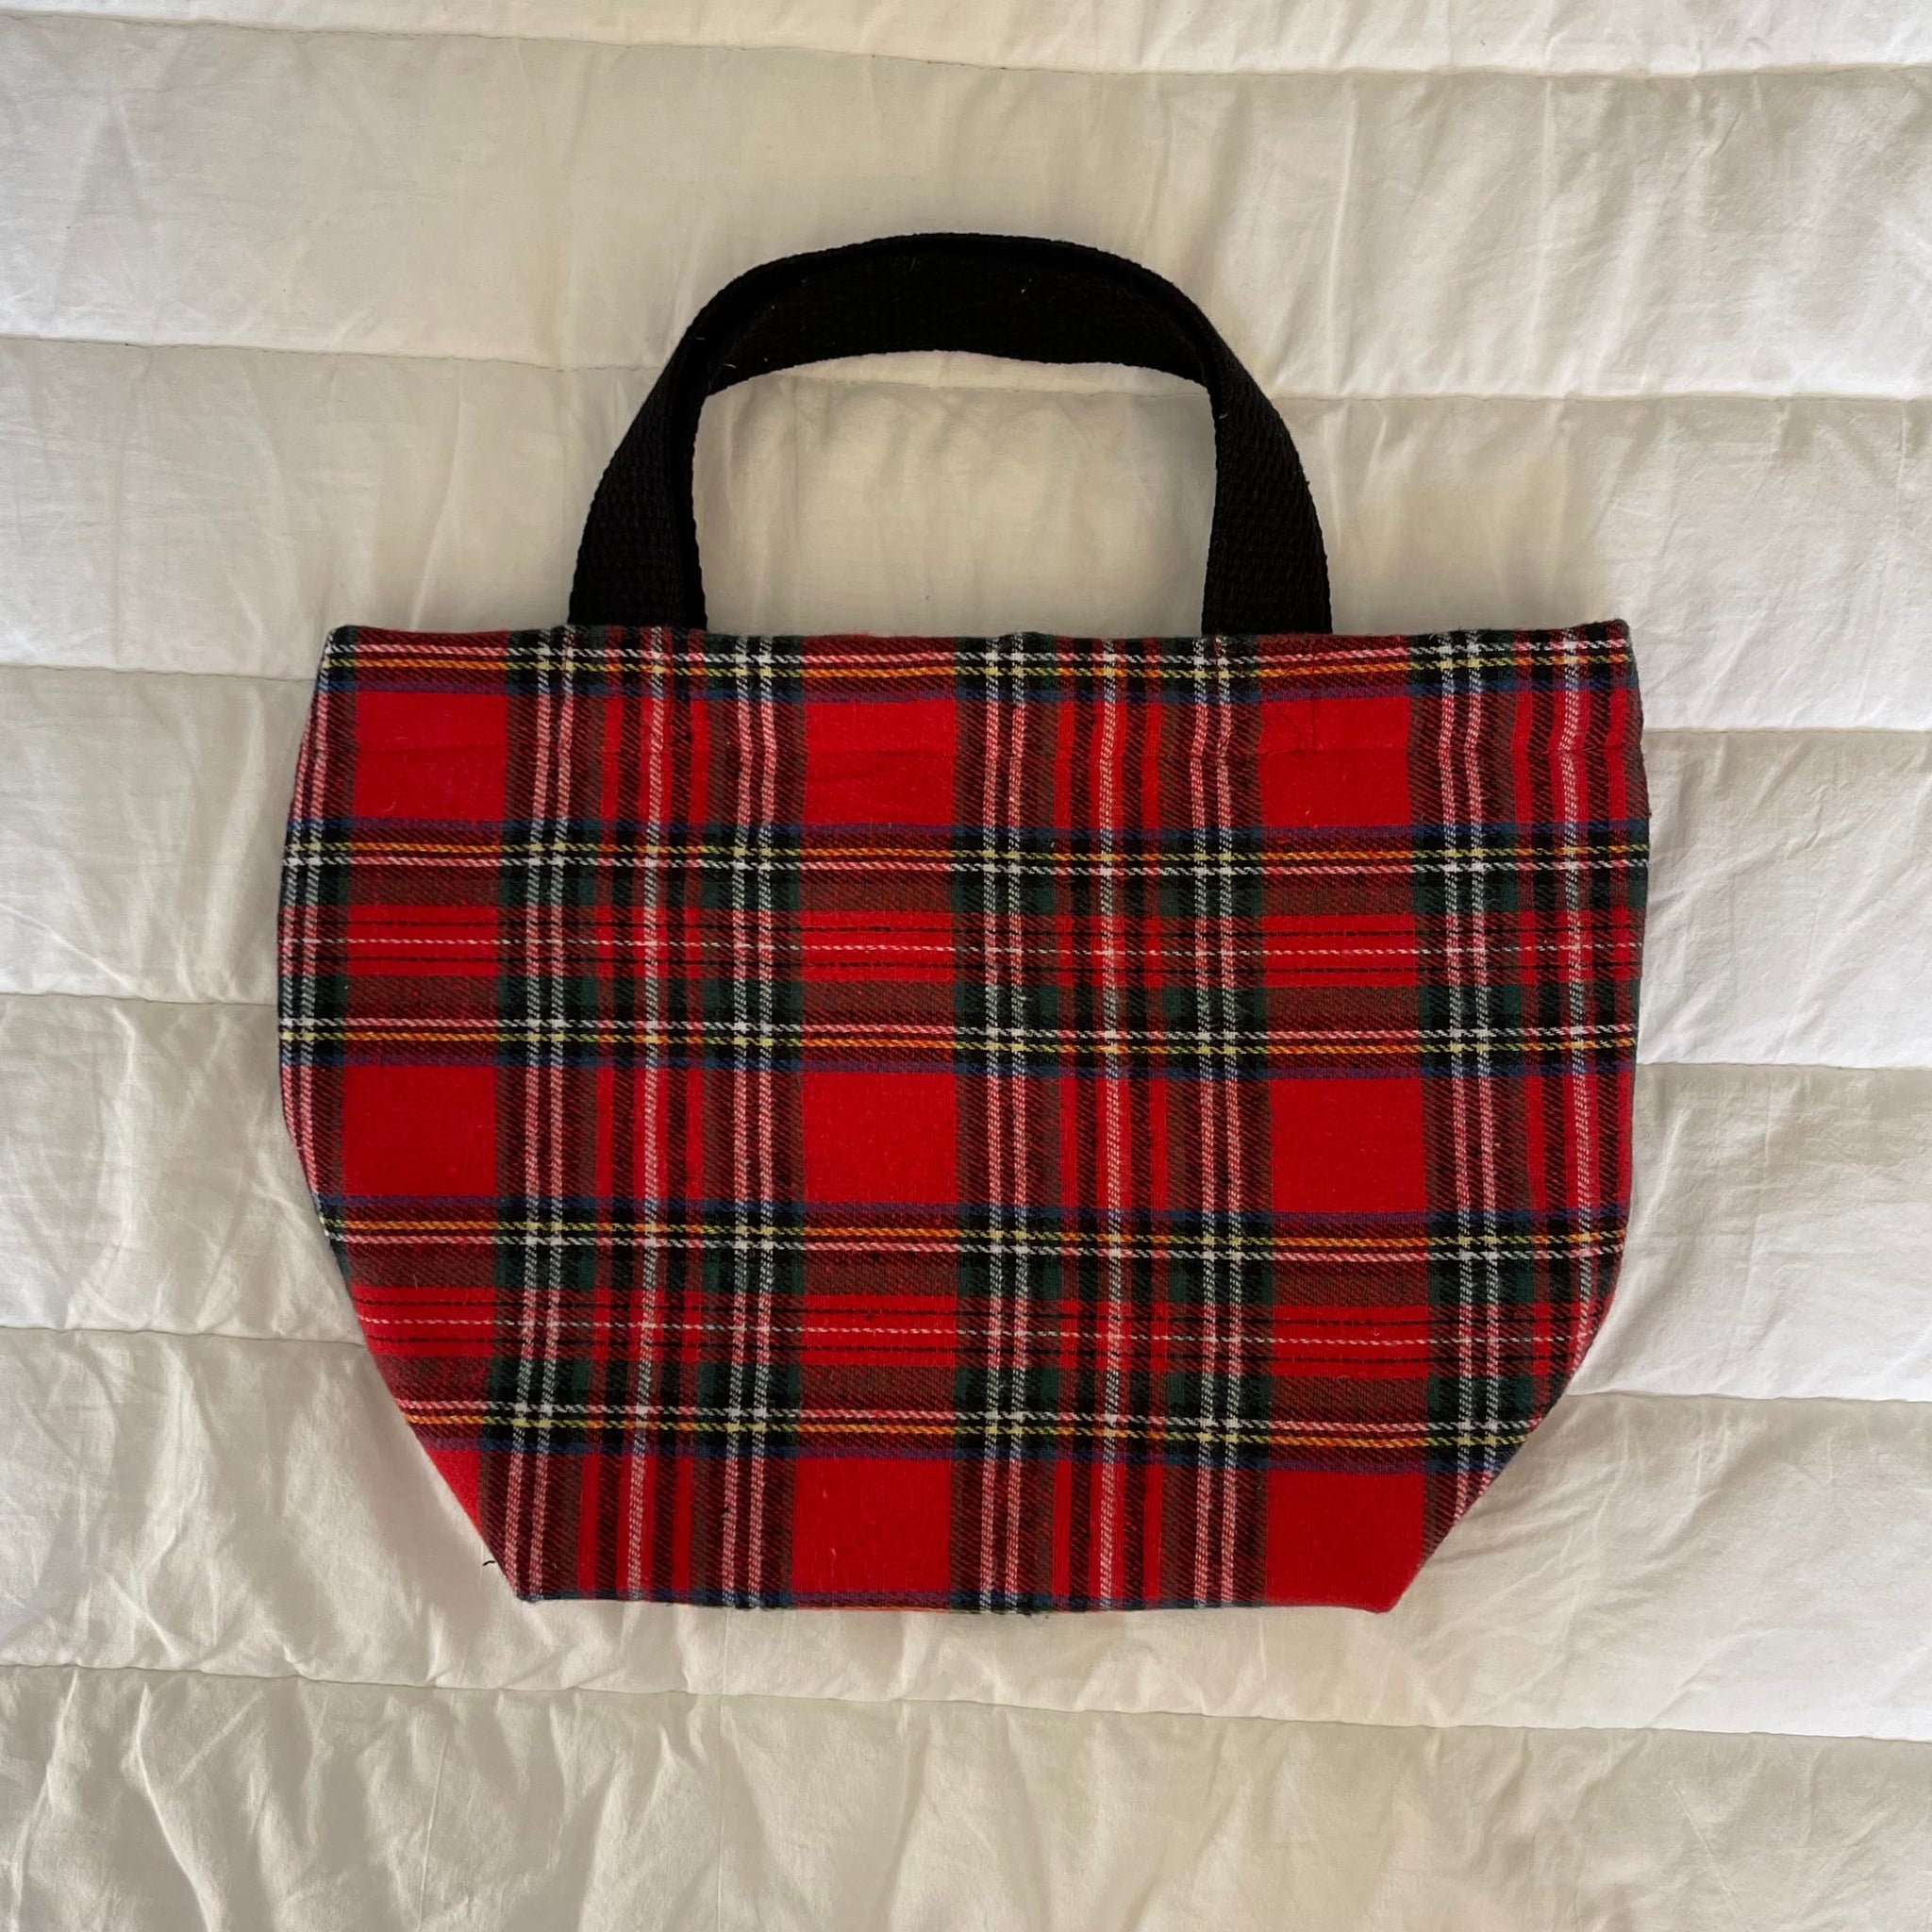 Banned Apparel Red Tartan Plaid Punk Purse with Handcuff Skull Charm :  Amazon.in: Shoes & Handbags